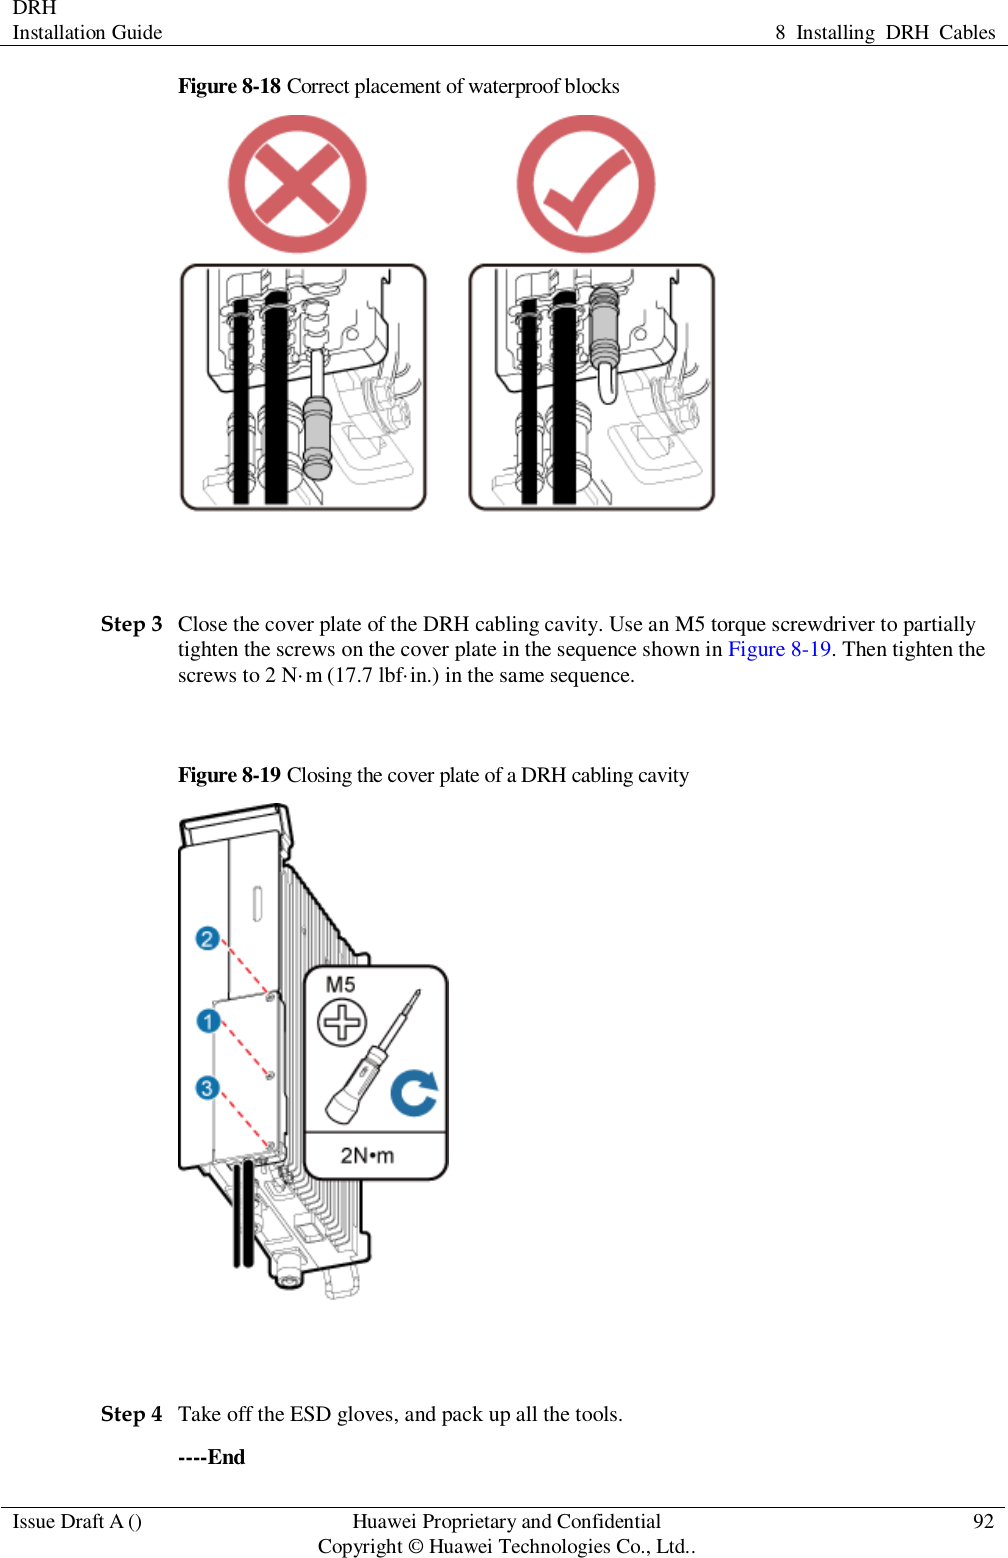 DRH   Installation Guide 8  Installing  DRH  Cables  Issue Draft A () Huawei Proprietary and Confidential                                     Copyright © Huawei Technologies Co., Ltd.. 92  Figure 8-18 Correct placement of waterproof blocks   Step 3 Close the cover plate of the DRH cabling cavity. Use an M5 torque screwdriver to partially tighten the screws on the cover plate in the sequence shown in Figure 8-19. Then tighten the screws to 2 N·m (17.7 lbf·in.) in the same sequence.  Figure 8-19 Closing the cover plate of a DRH cabling cavity   Step 4 Take off the ESD gloves, and pack up all the tools. ----End 